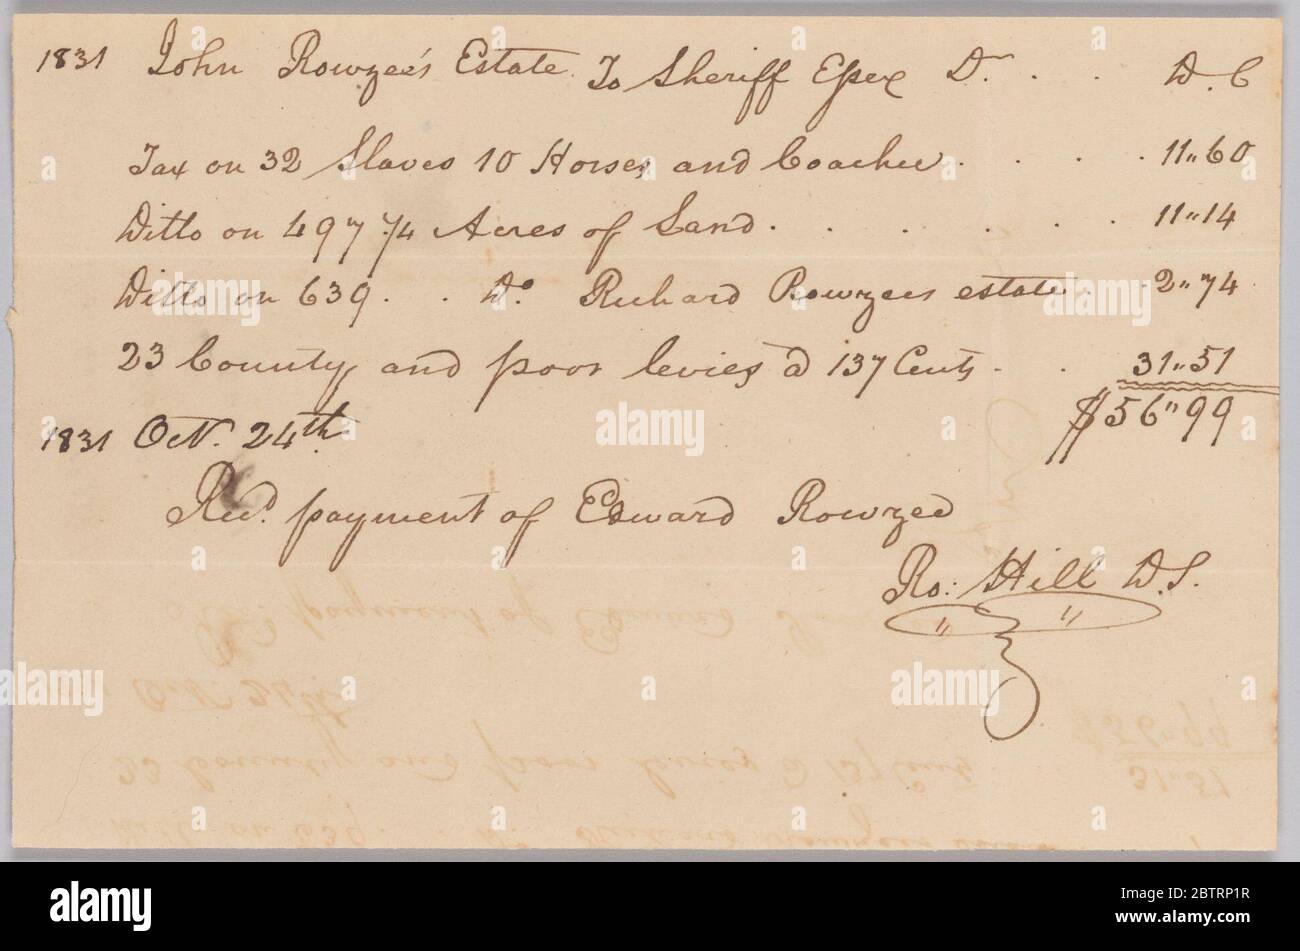 Account of taxable property including enslaved persons owned by John Rouzee. This document is from a collection of financial papers related to the plantation operations of several generations of the Rouzee Family in Essex County, Virginia. Stock Photo